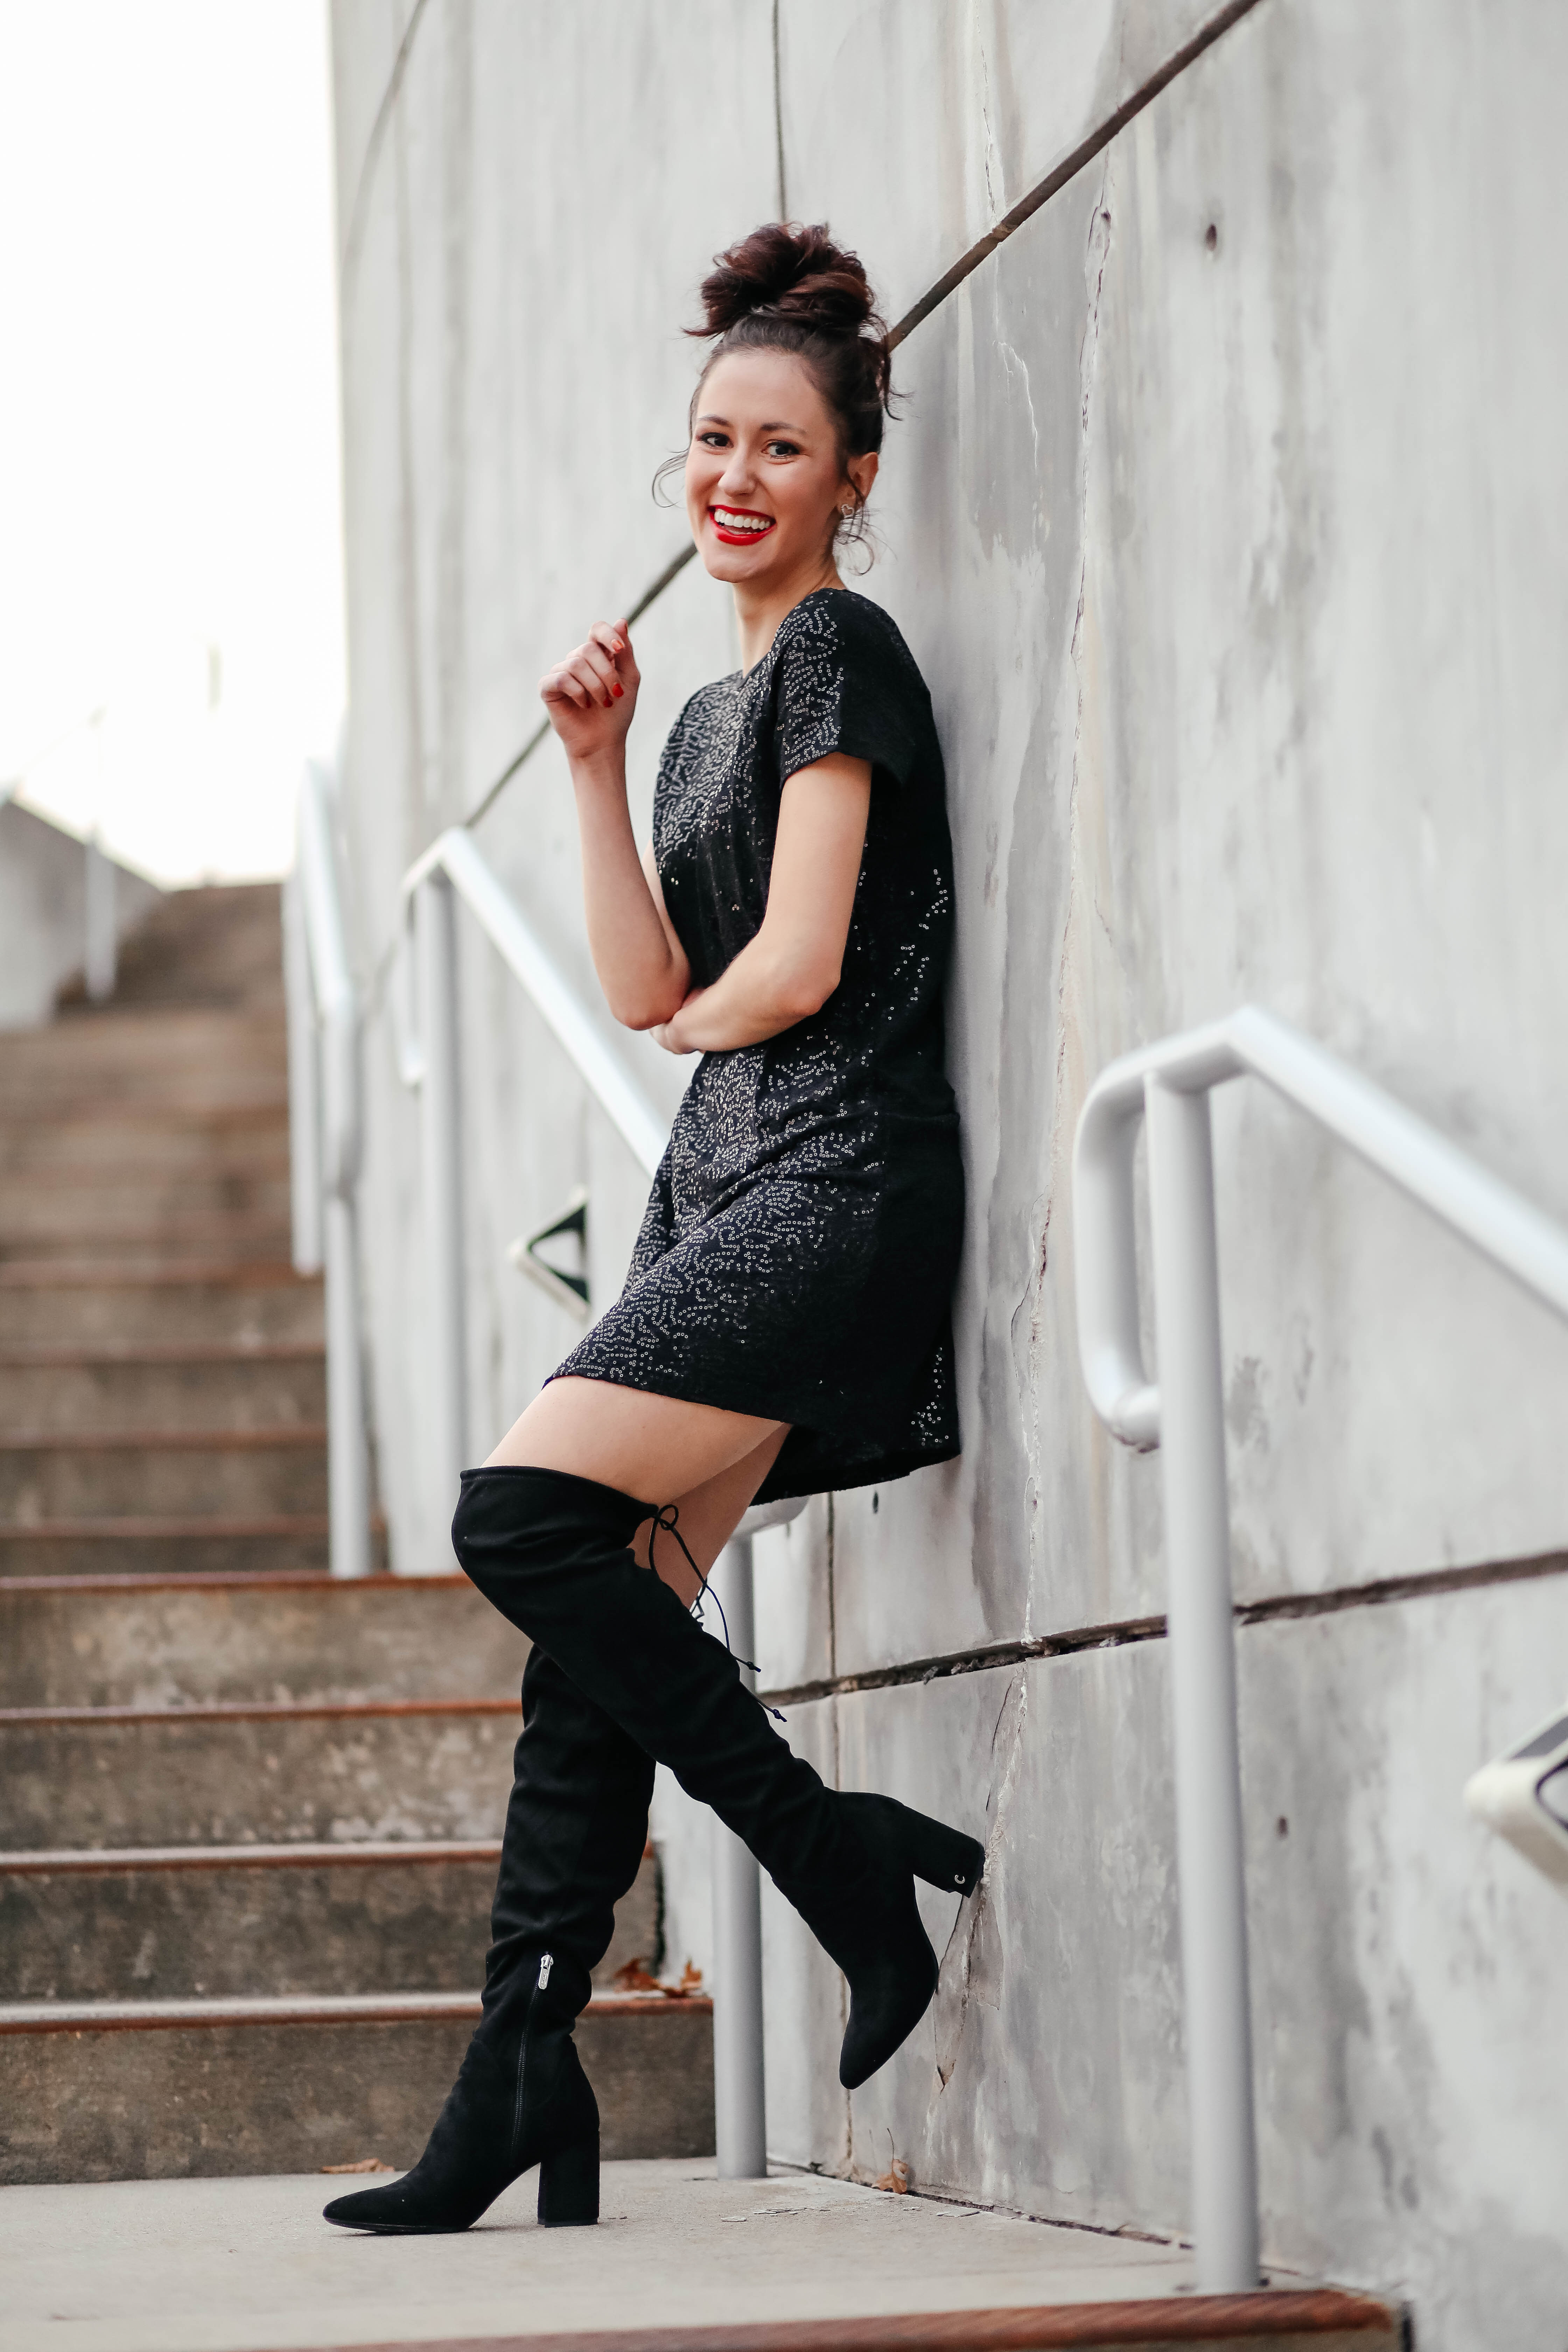 $35 stretchy sequin dress - TWO Ways to Wear Sequins for the Holidays - Affordable Holiday Looks from Walmart on Coming Up Roses